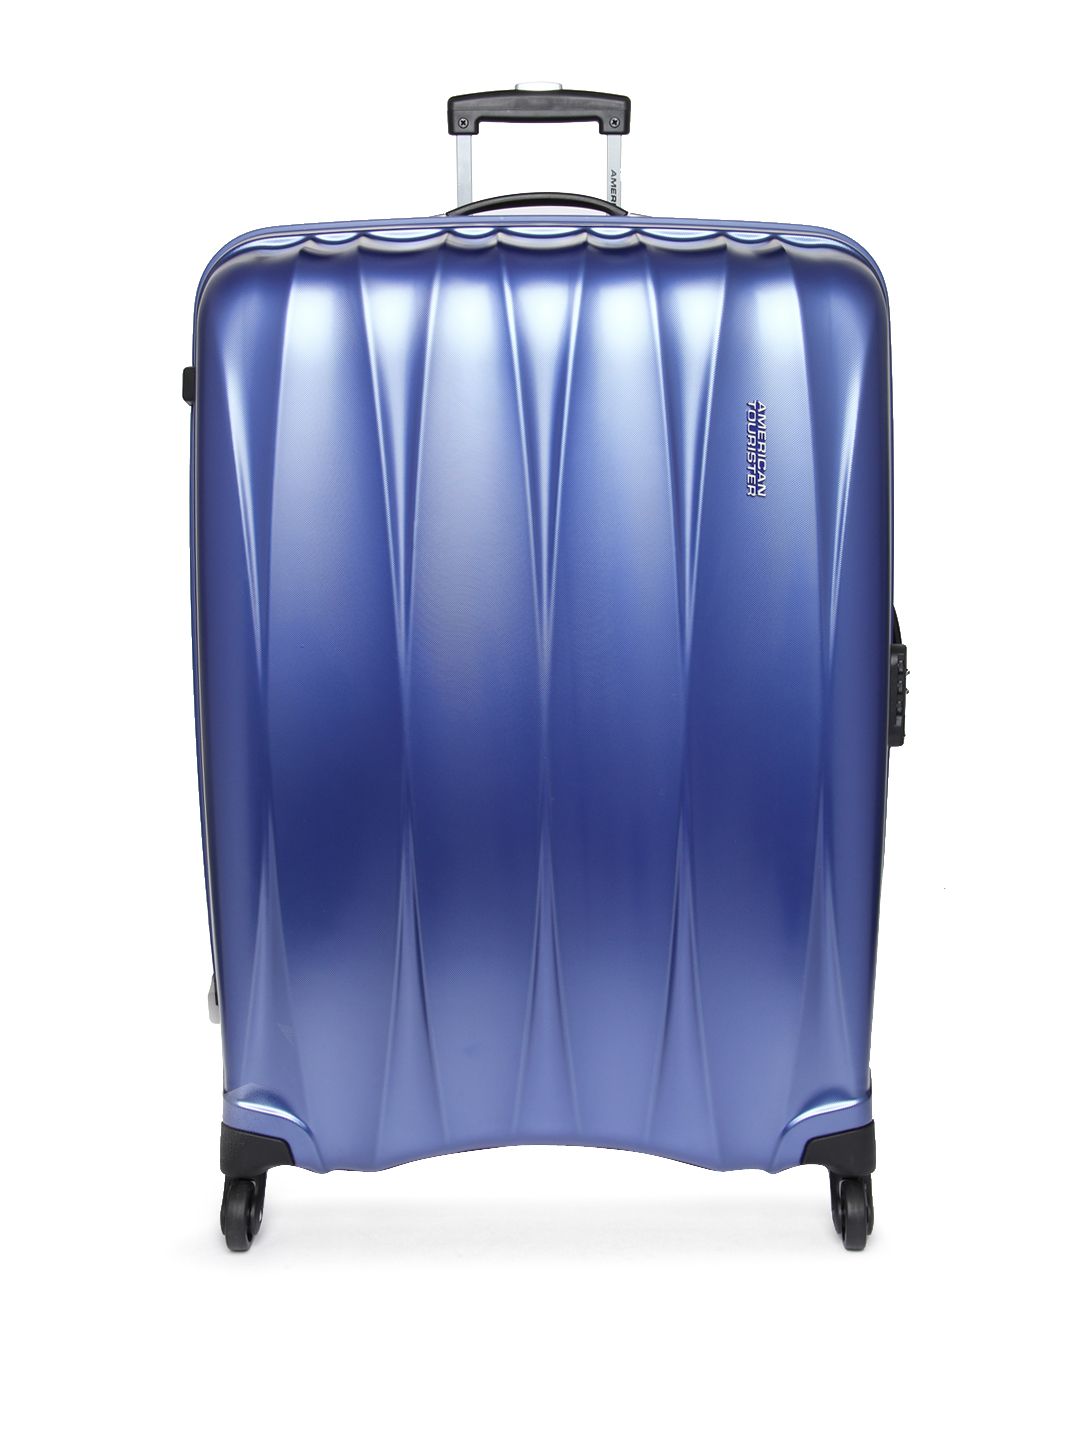 AMERICAN TOURISTER Unisex Blue Arona Large Trolley Suitcase Price in India